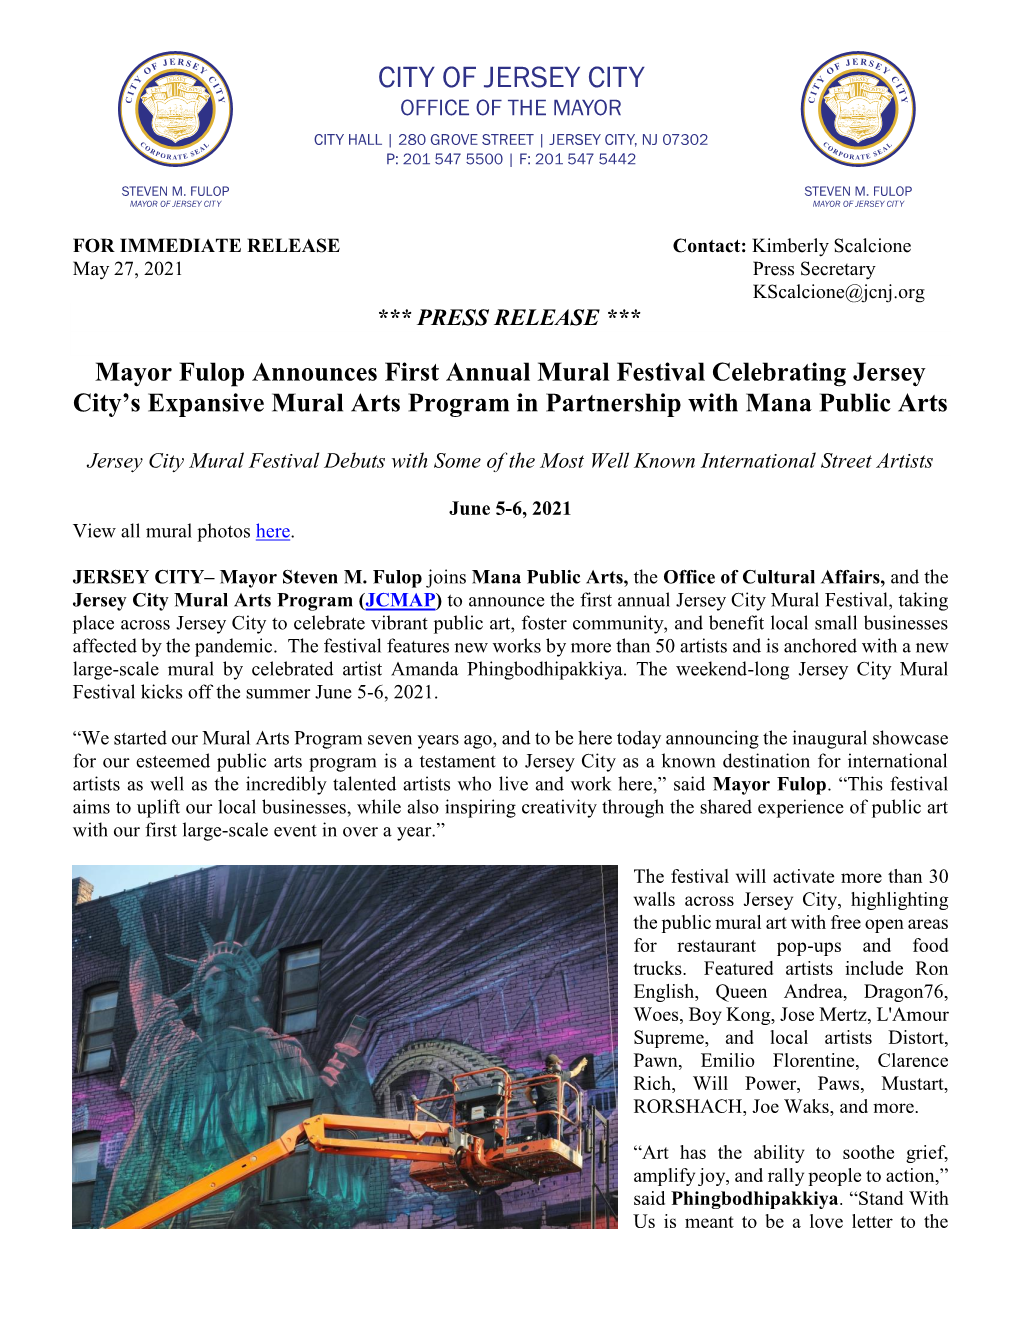 Mayor Fulop Announces First Annual Mural Festival Celebrating Jersey City’S Expansive Mural Arts Program in Partnership with Mana Public Arts